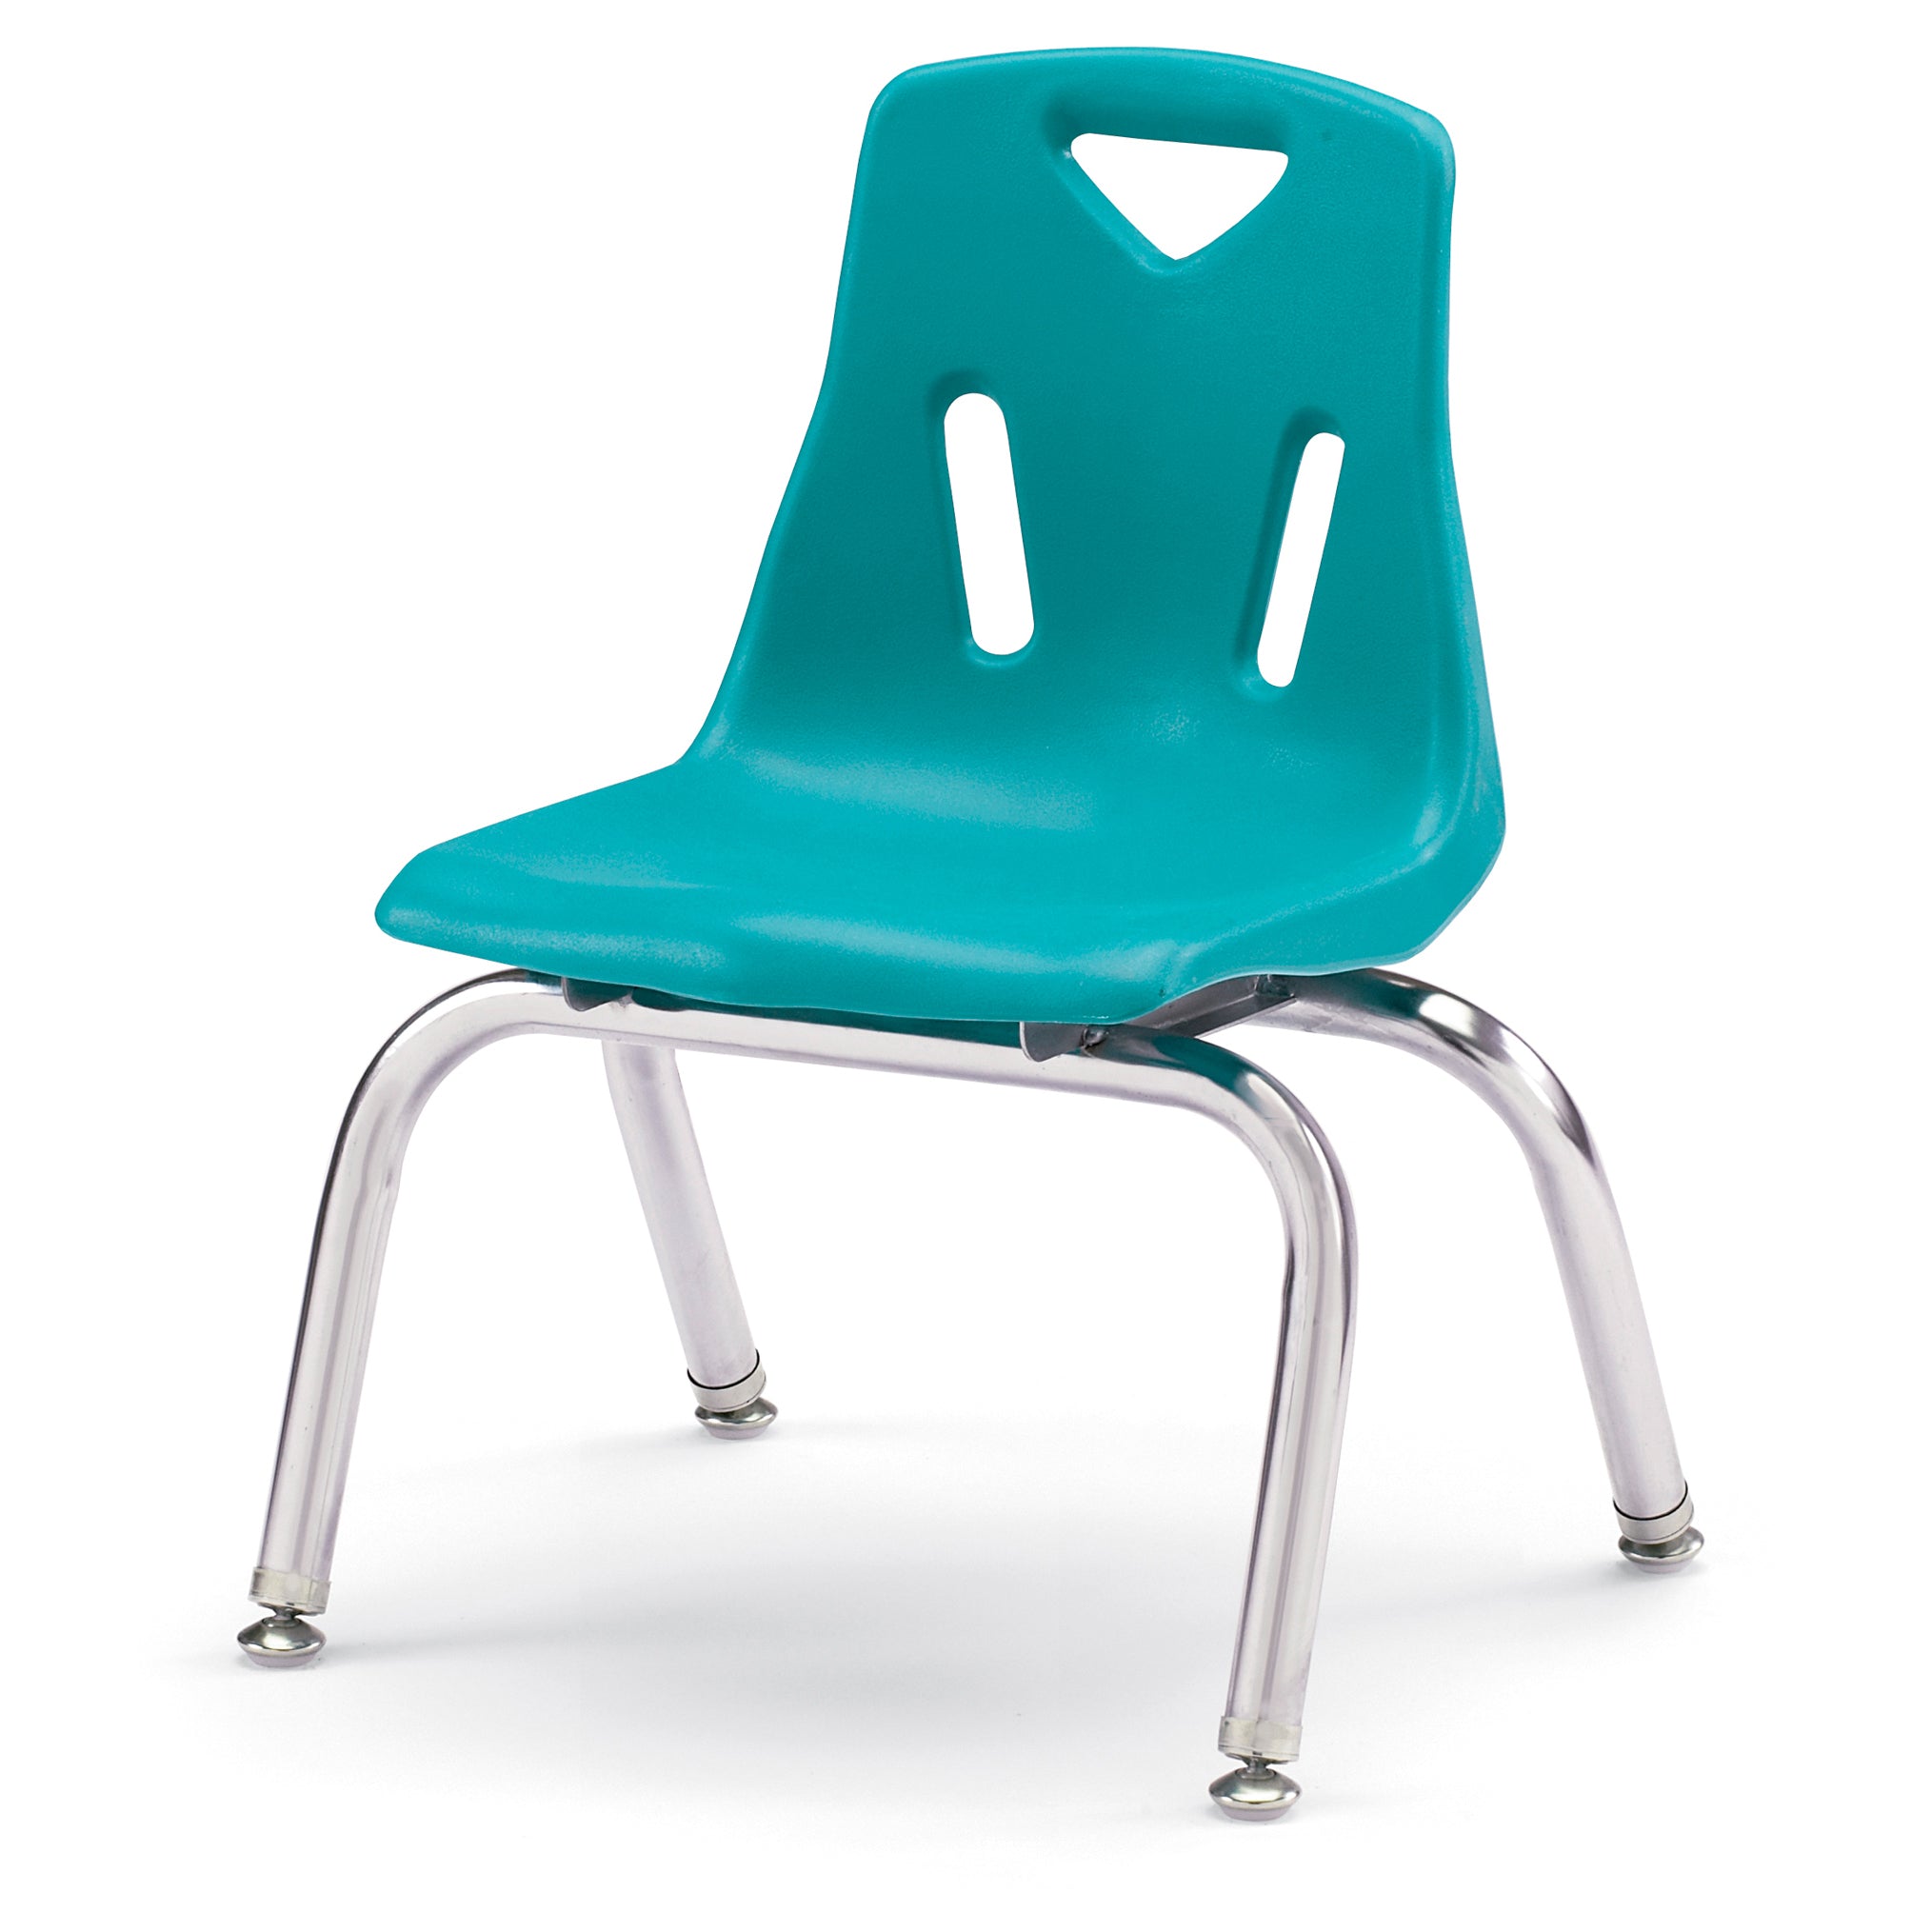 8140JC1005, Berries Stacking Chair with Chrome-Plated Legs - 10" Ht - Teal